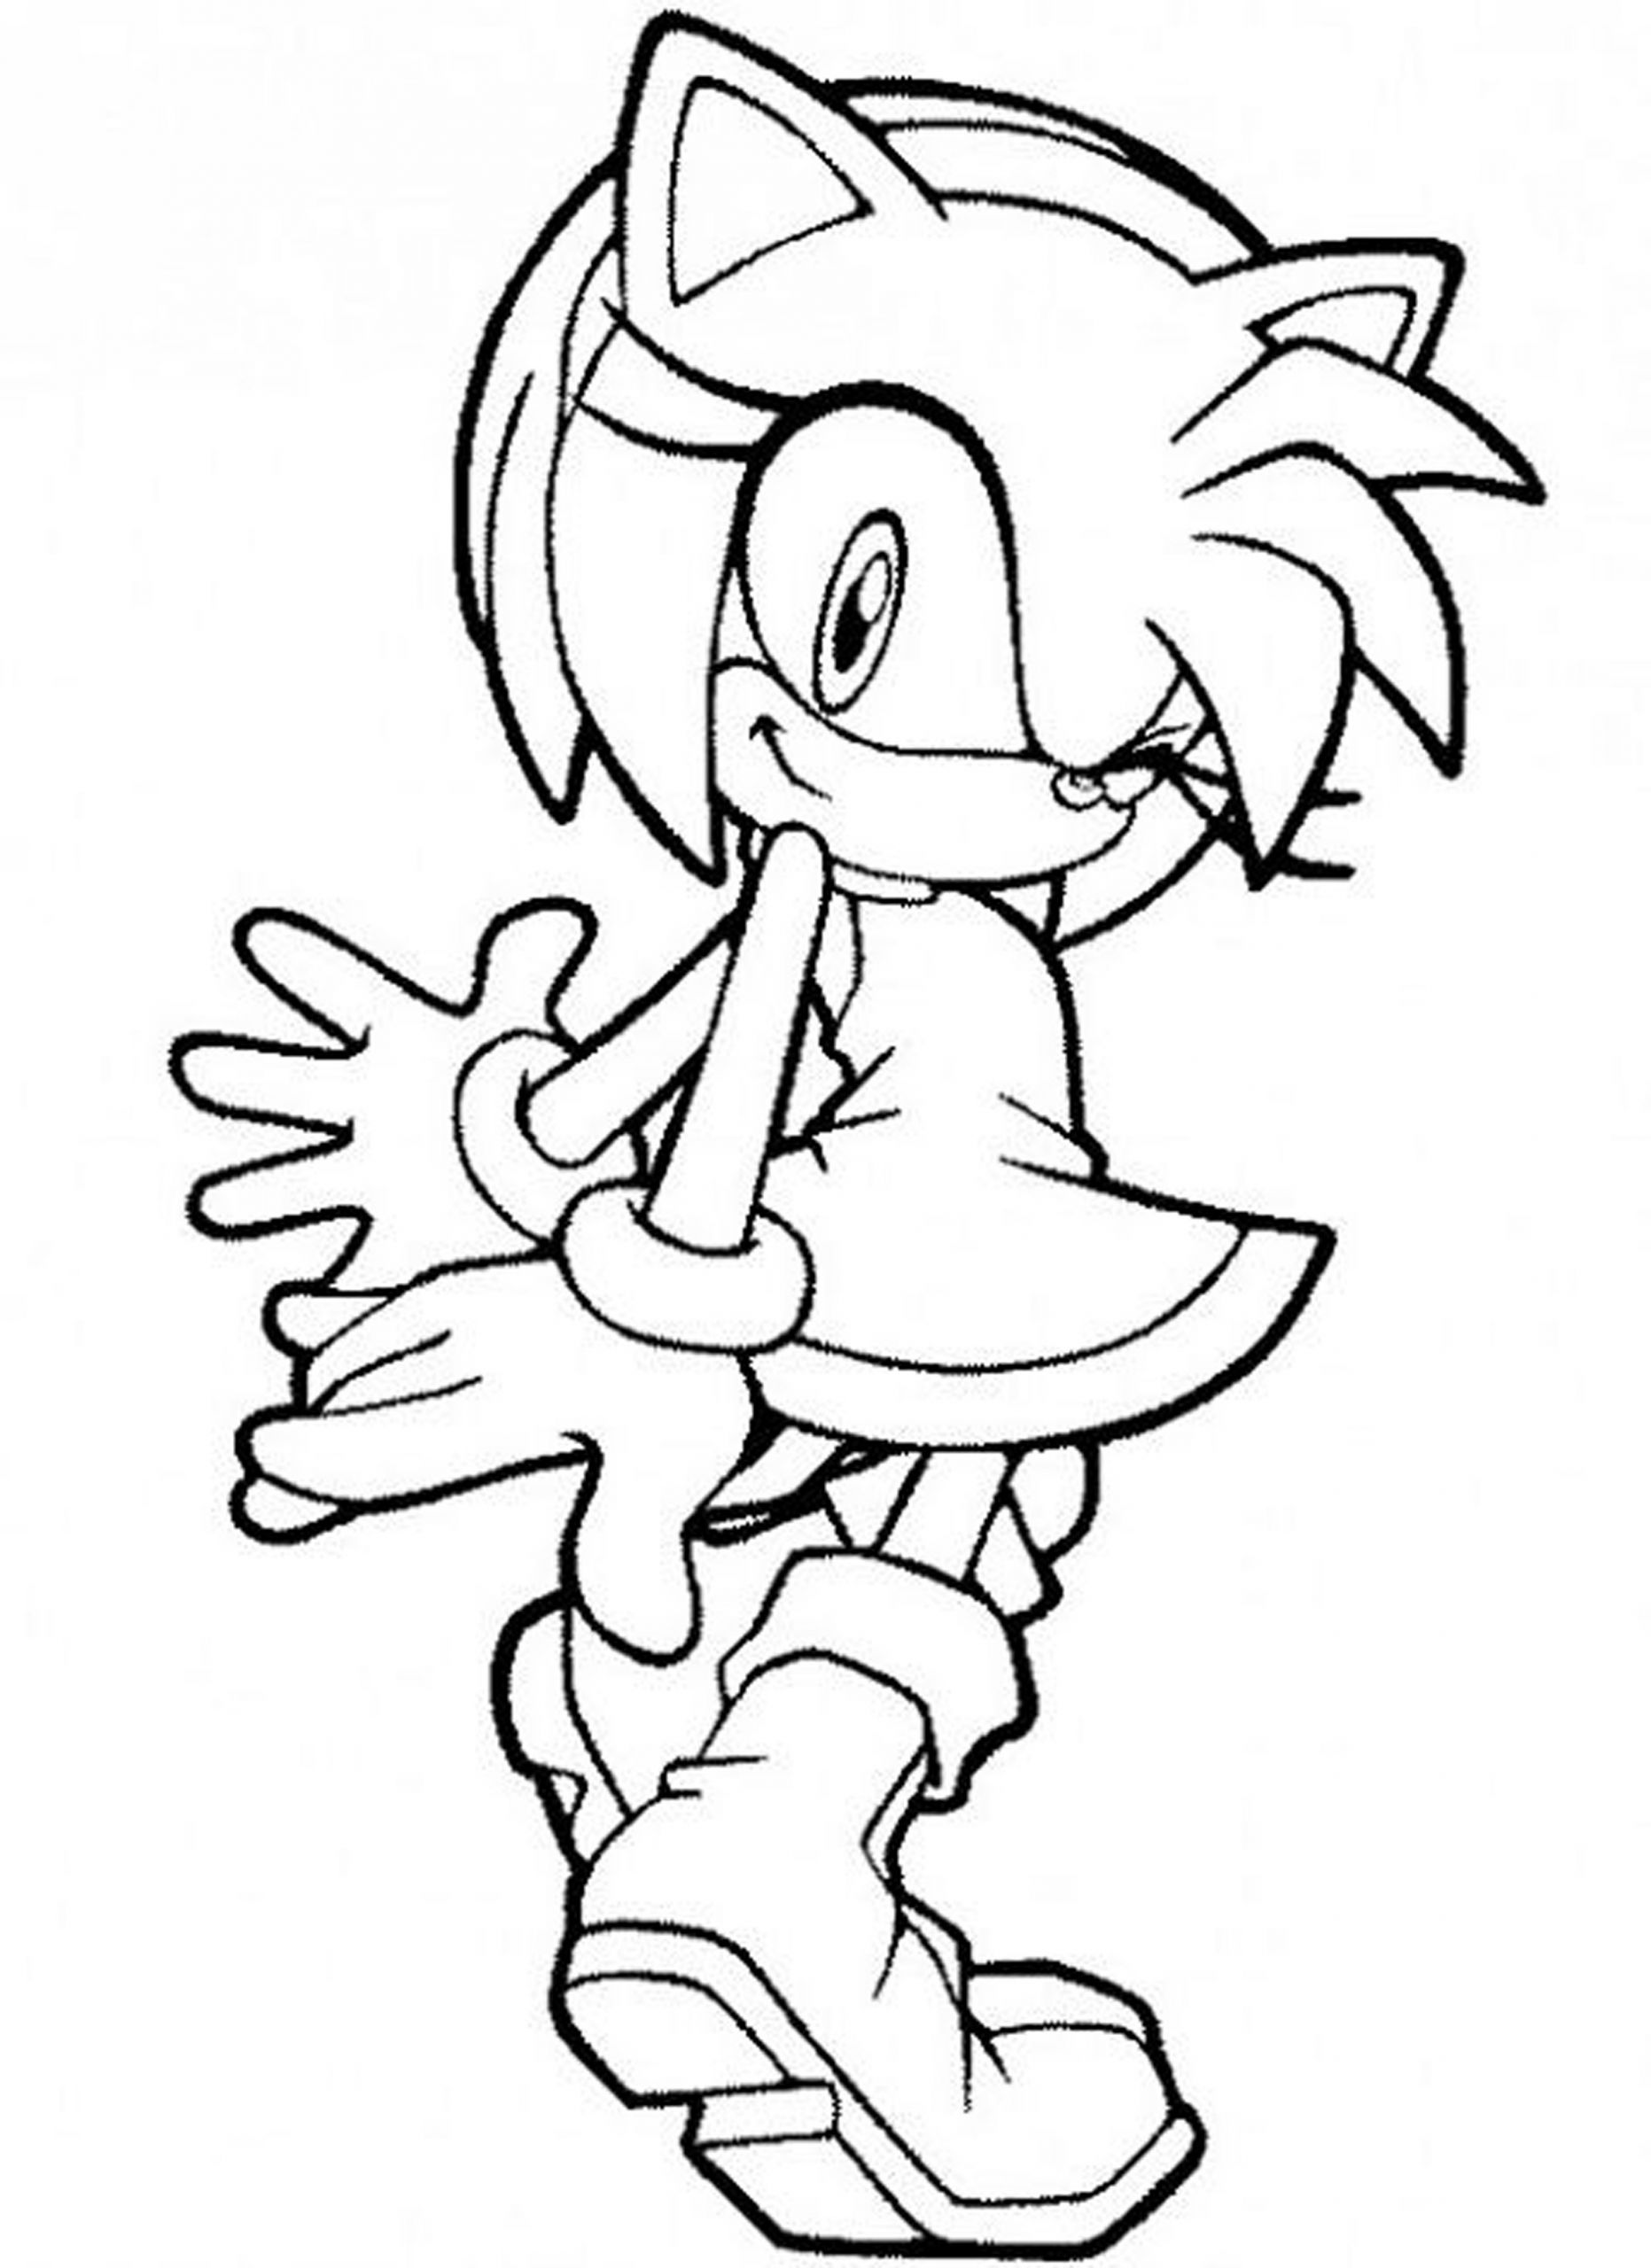 Coloring Pages For Girls Online
 Coloring Pages For Girls 9 And Up